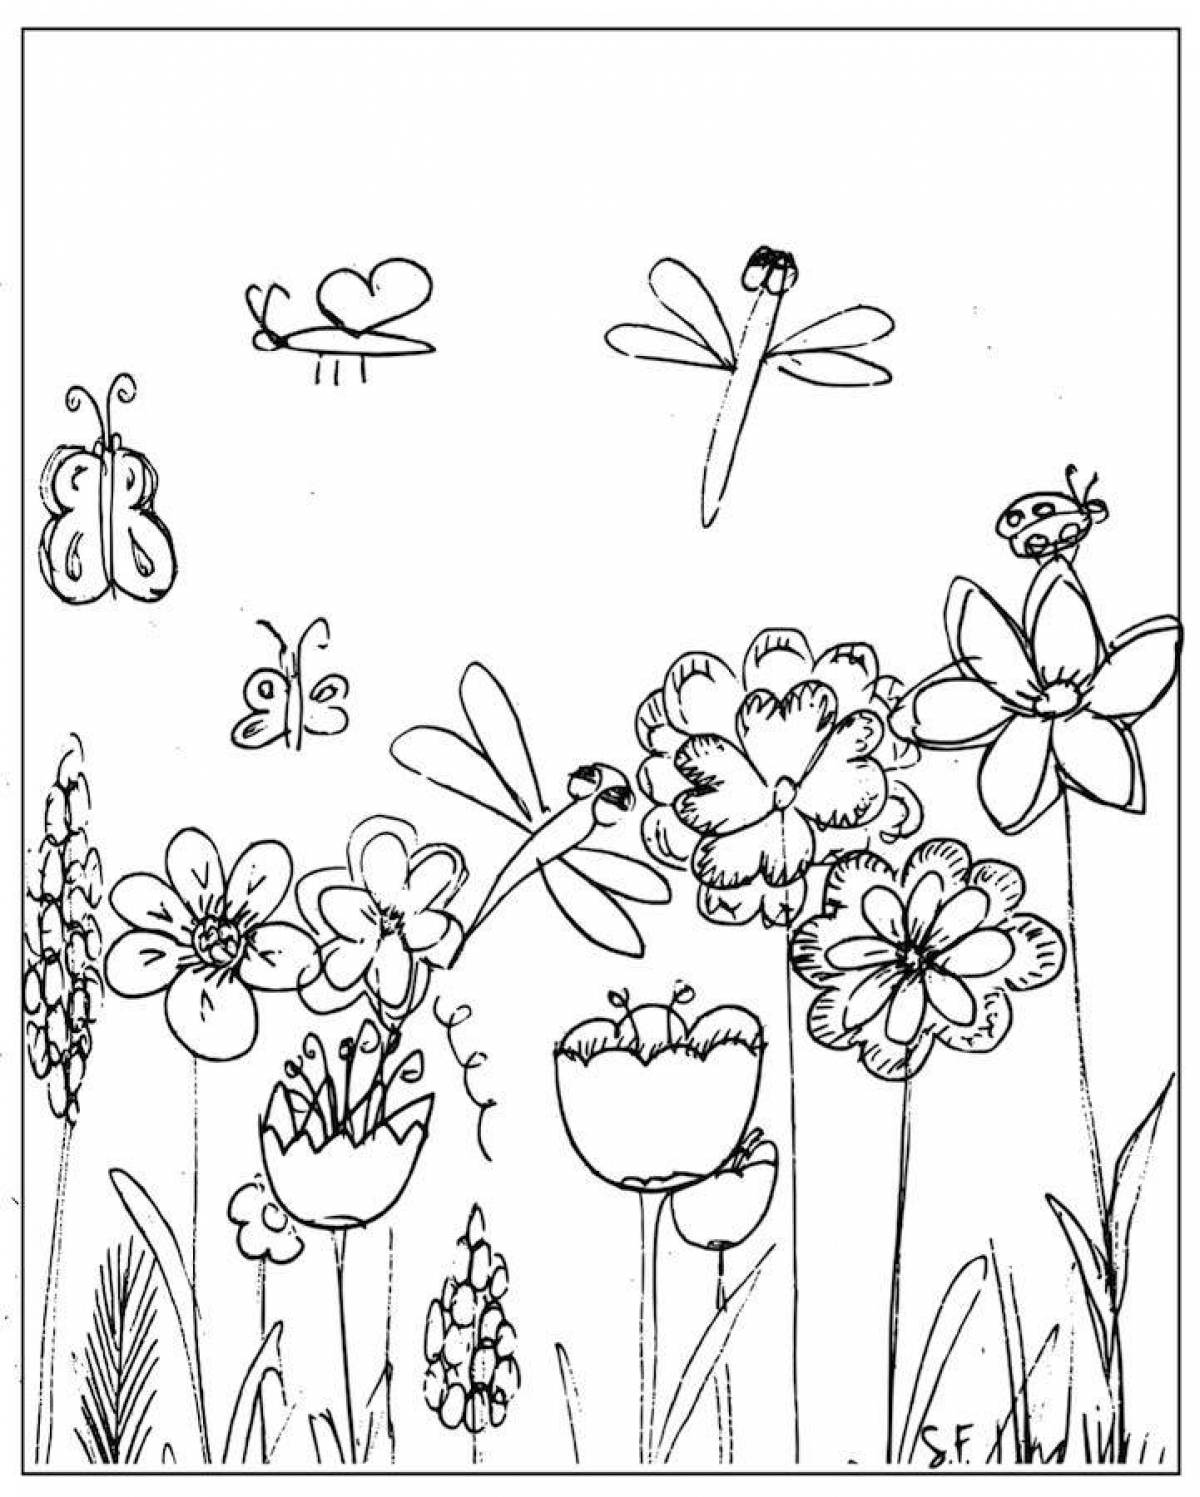 Glowing meadow coloring page